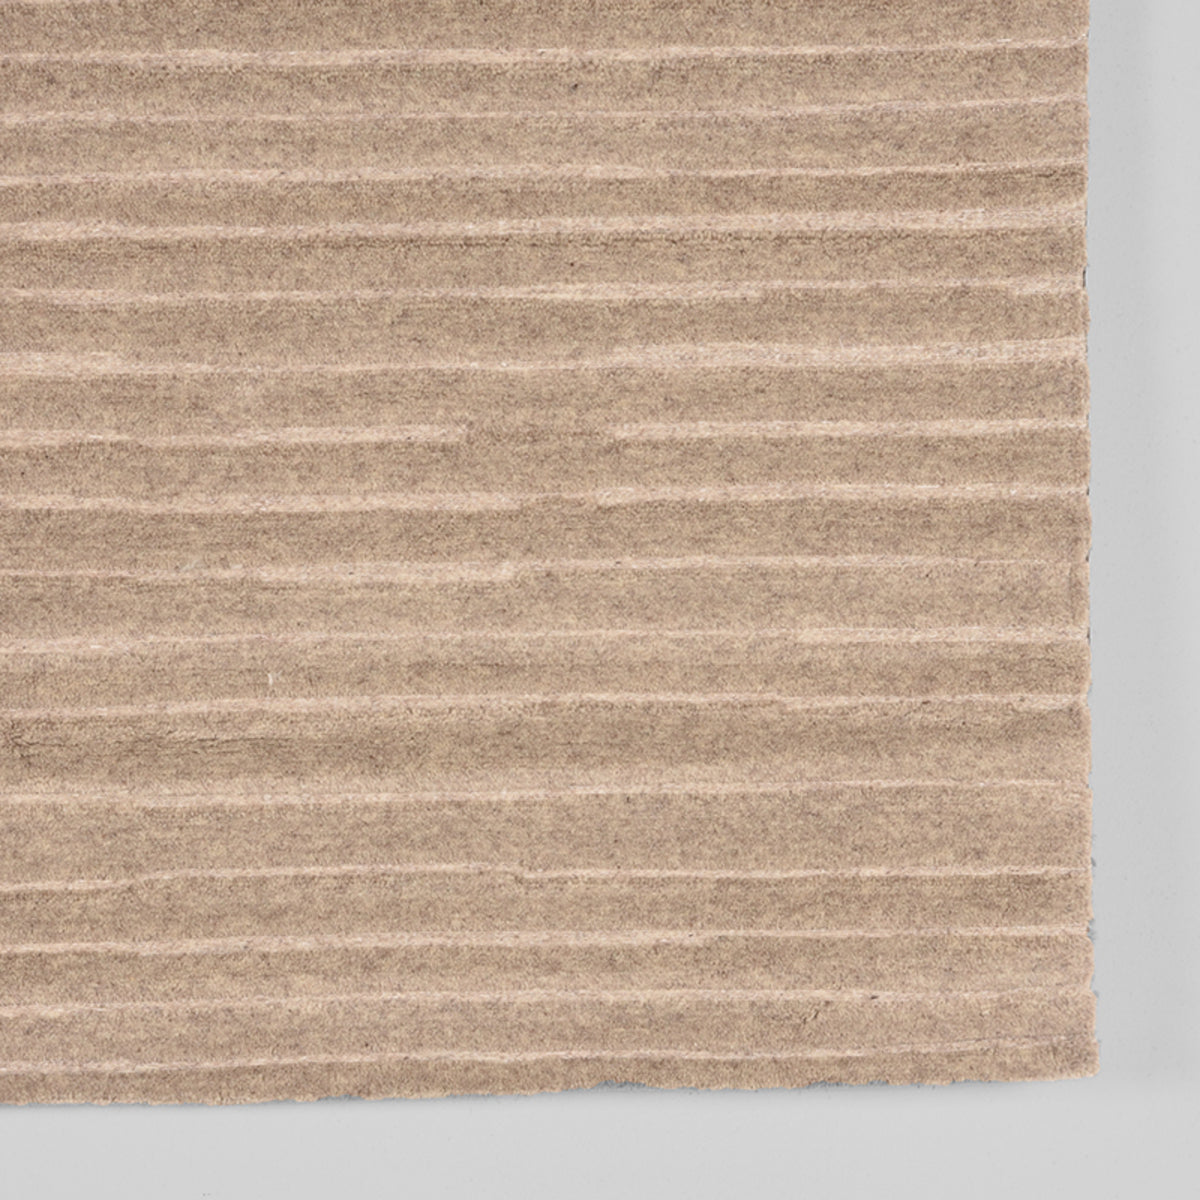 LABEL51 Rugs Luxy - Taupe - Wool - 200x300 cm